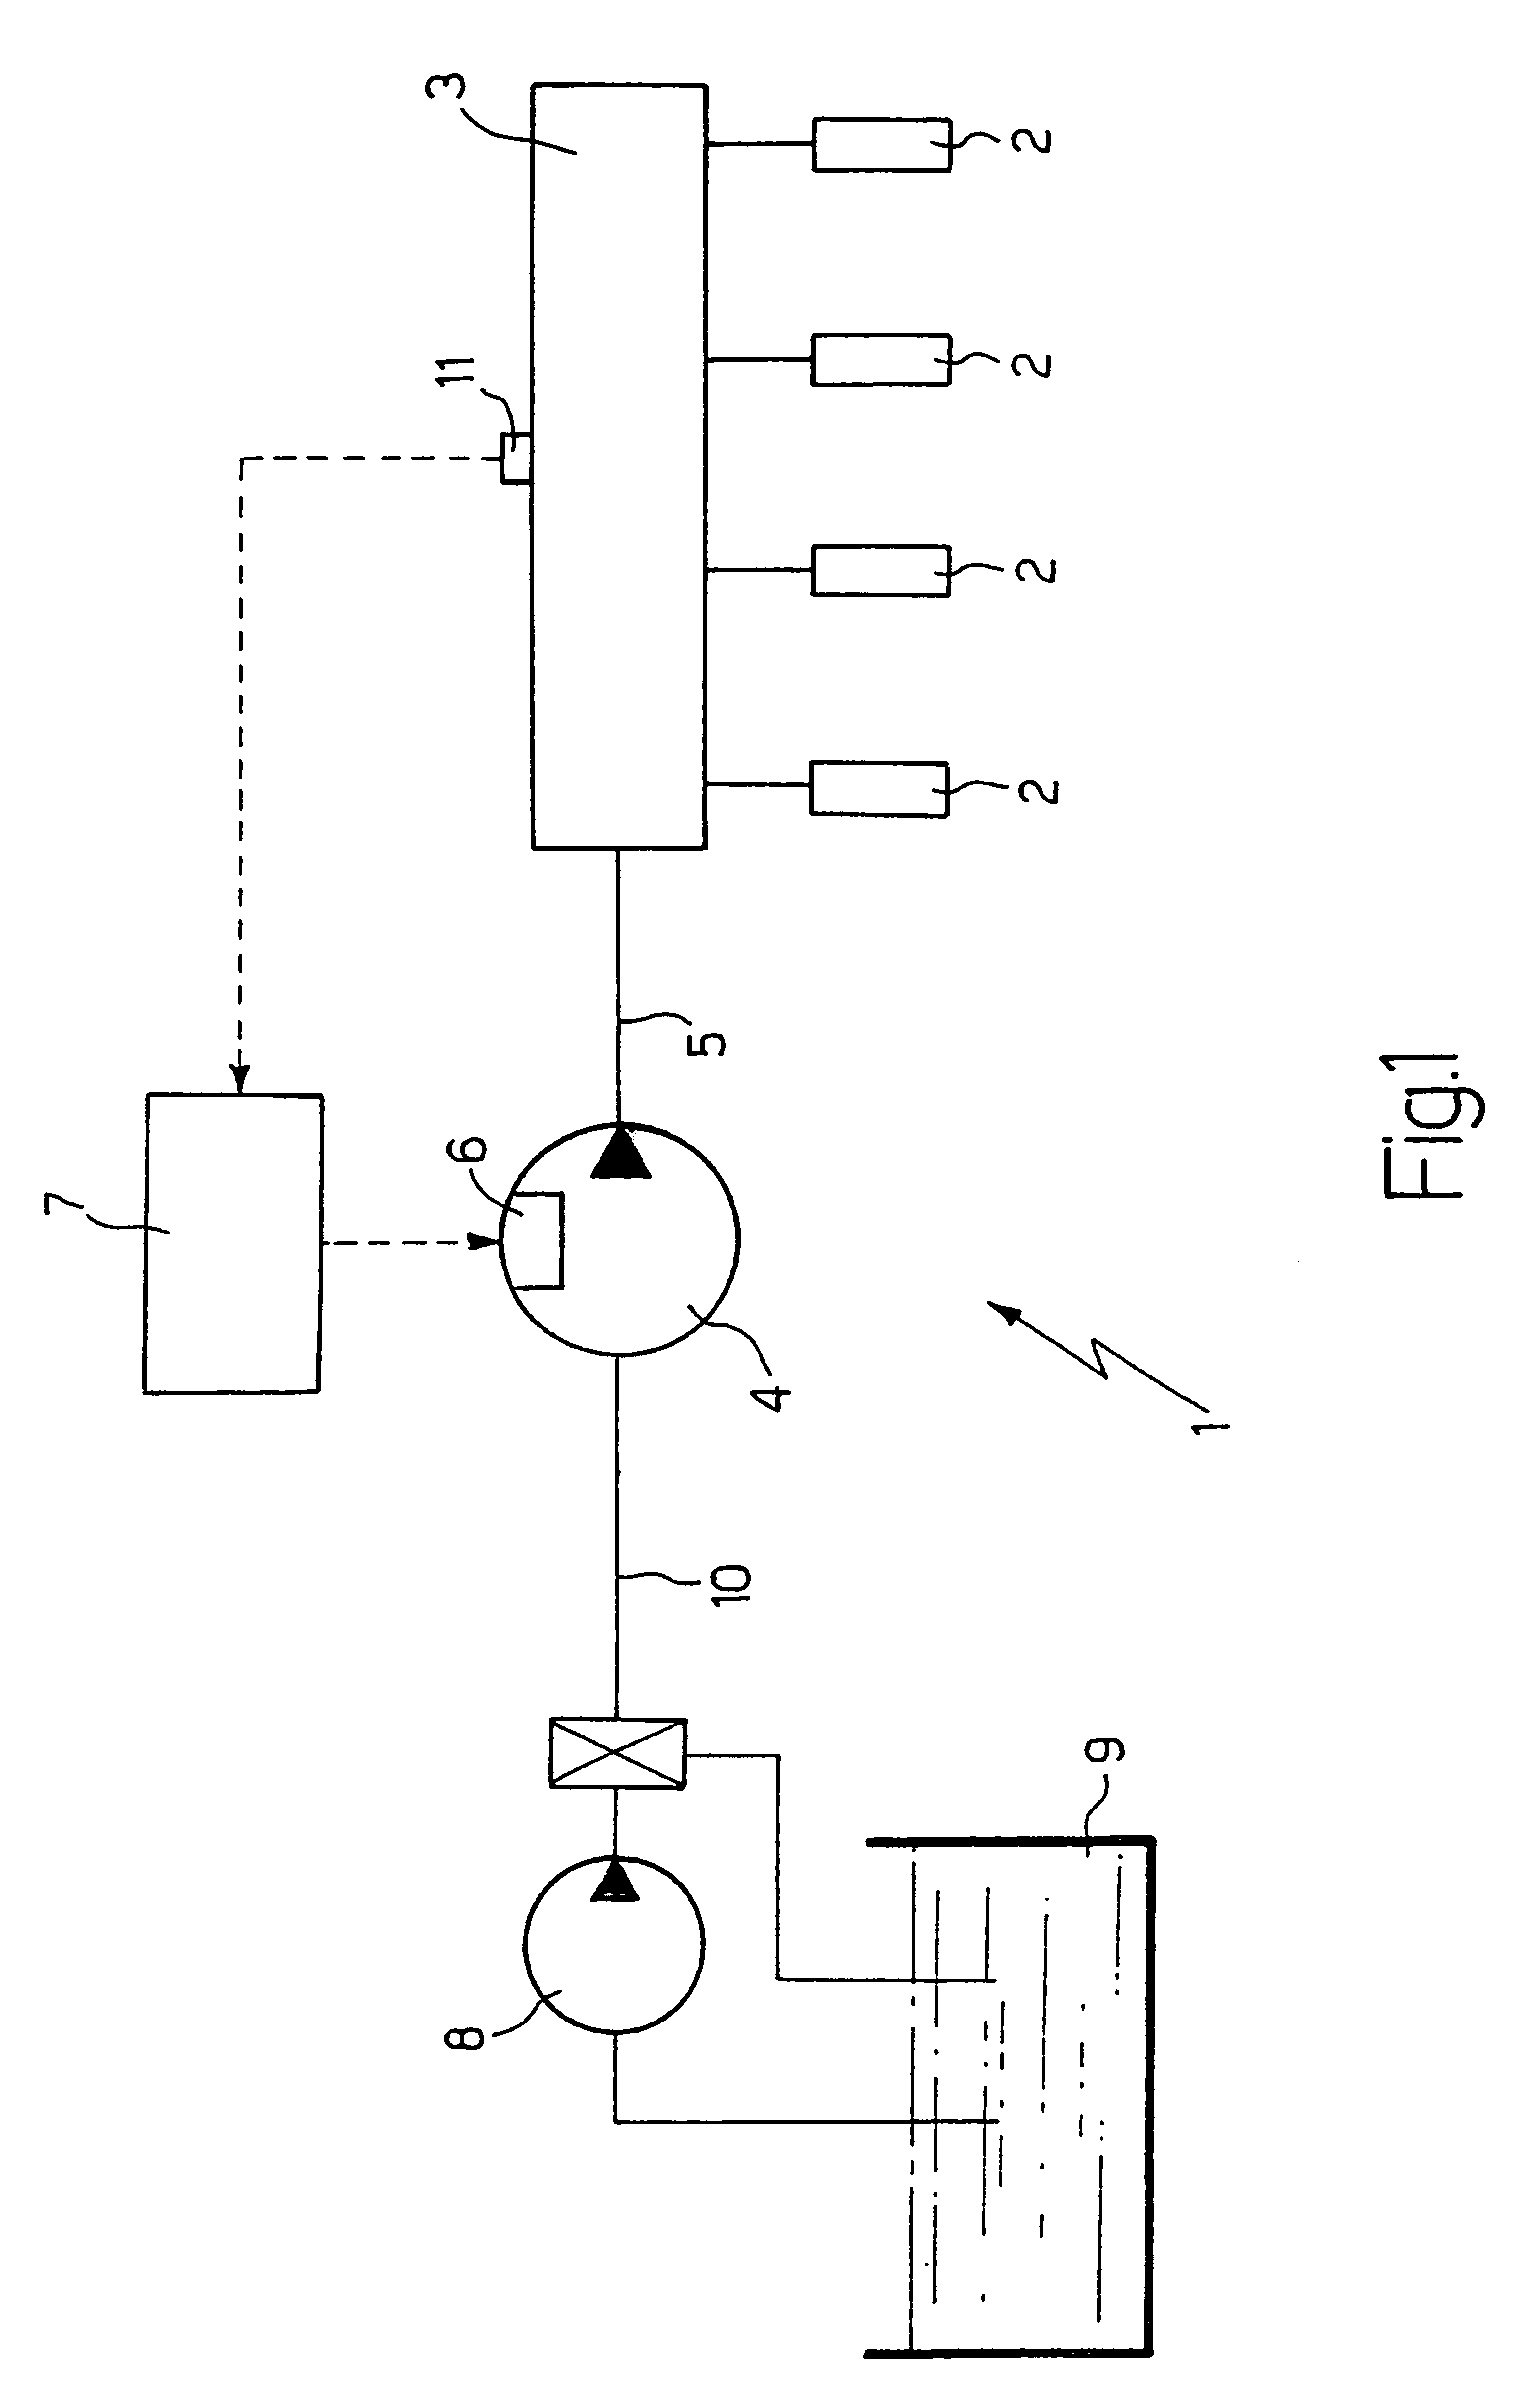 Method for the direct injection of fuel into an internal combustion engine